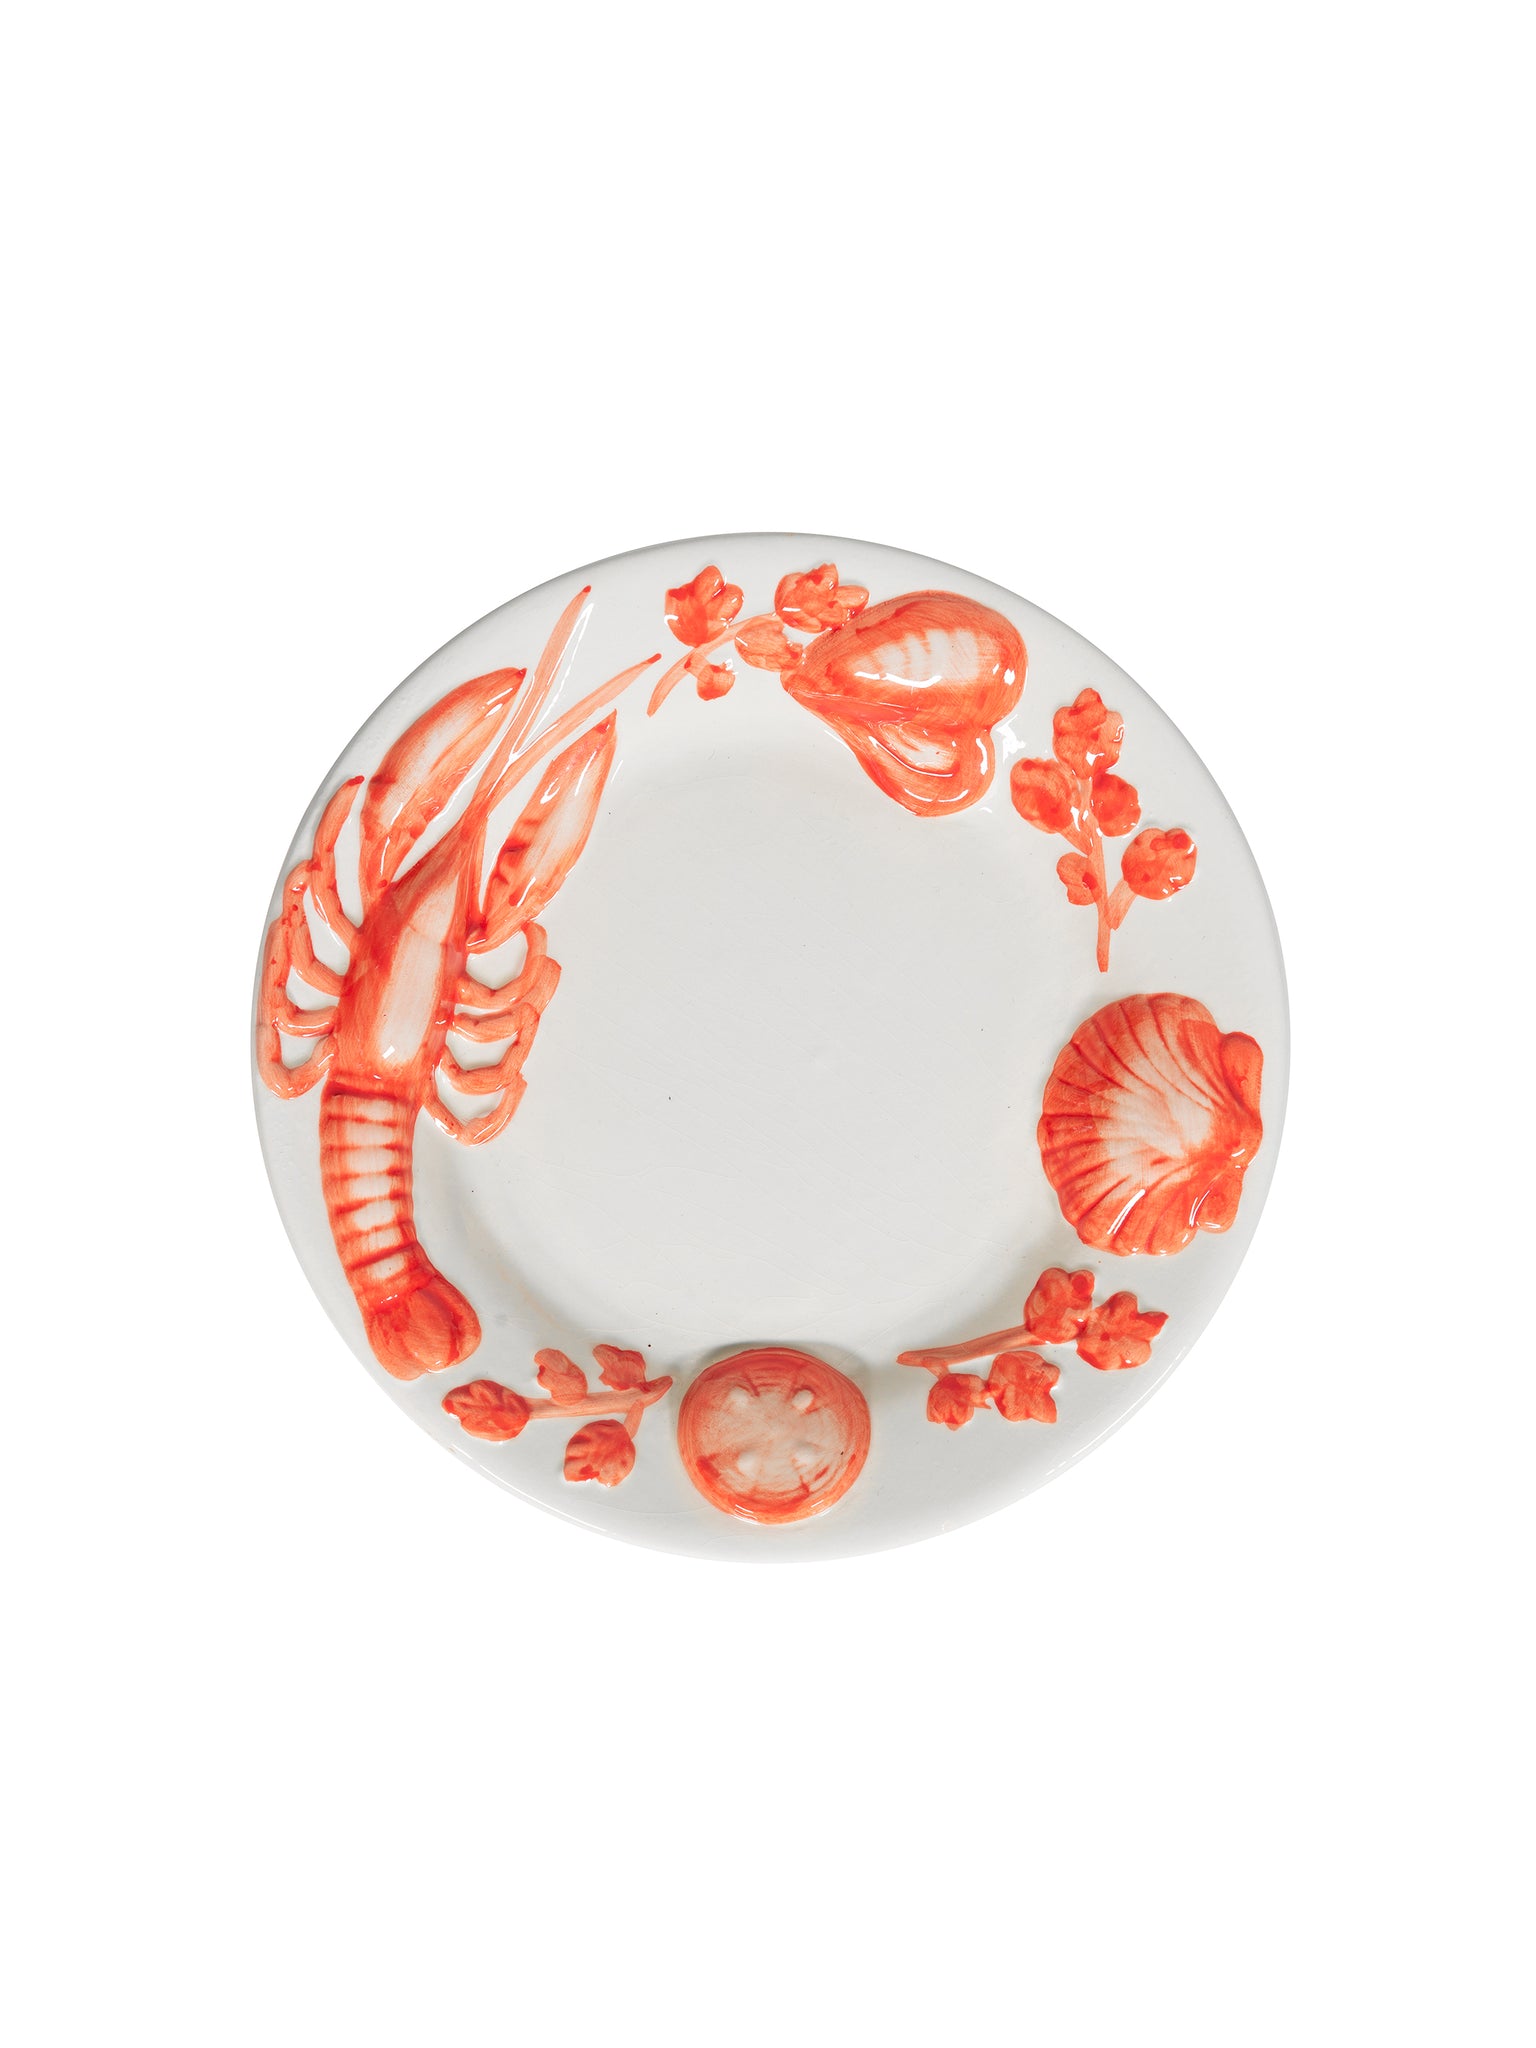 Vintage 1950s Lobster Plate Red Weston Table